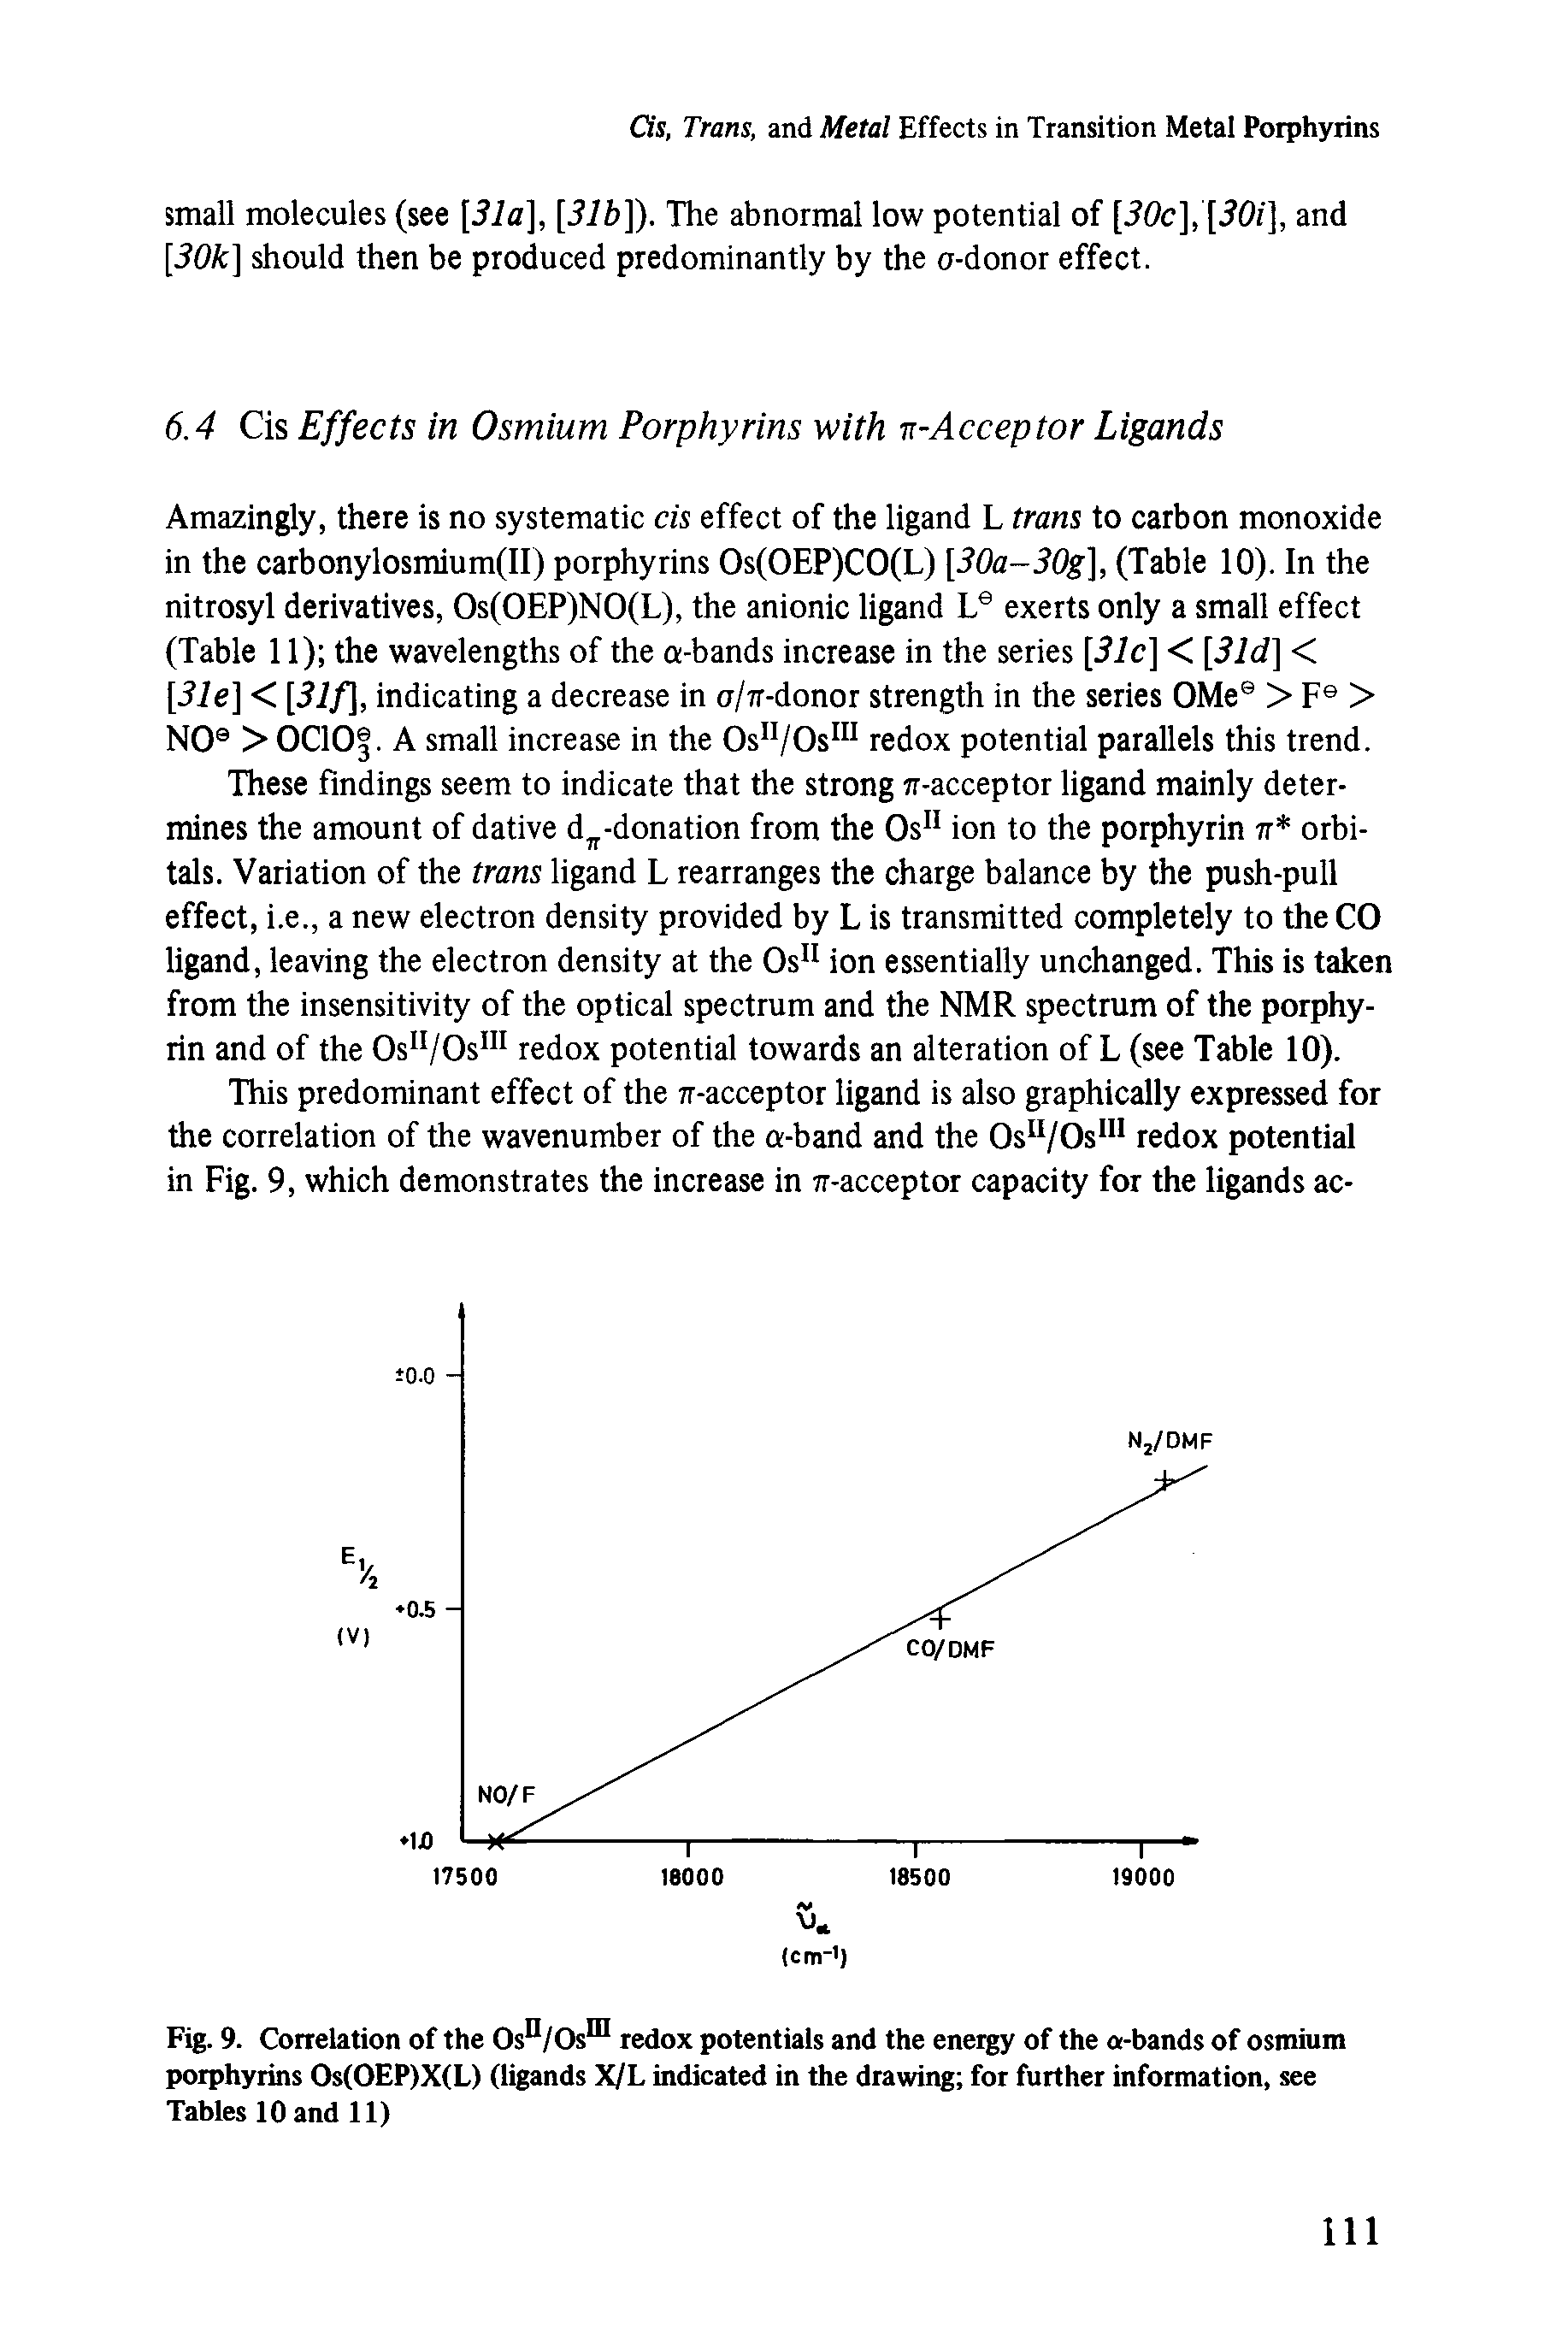 Fig. 9. Correlation of the Osn/Osffl redox potentials and the energy of the a-bands of osmium porphyrins Os(OEP)X(L) (ligands X/L indicated in the drawing for further information, see Tables 10 and 11)...